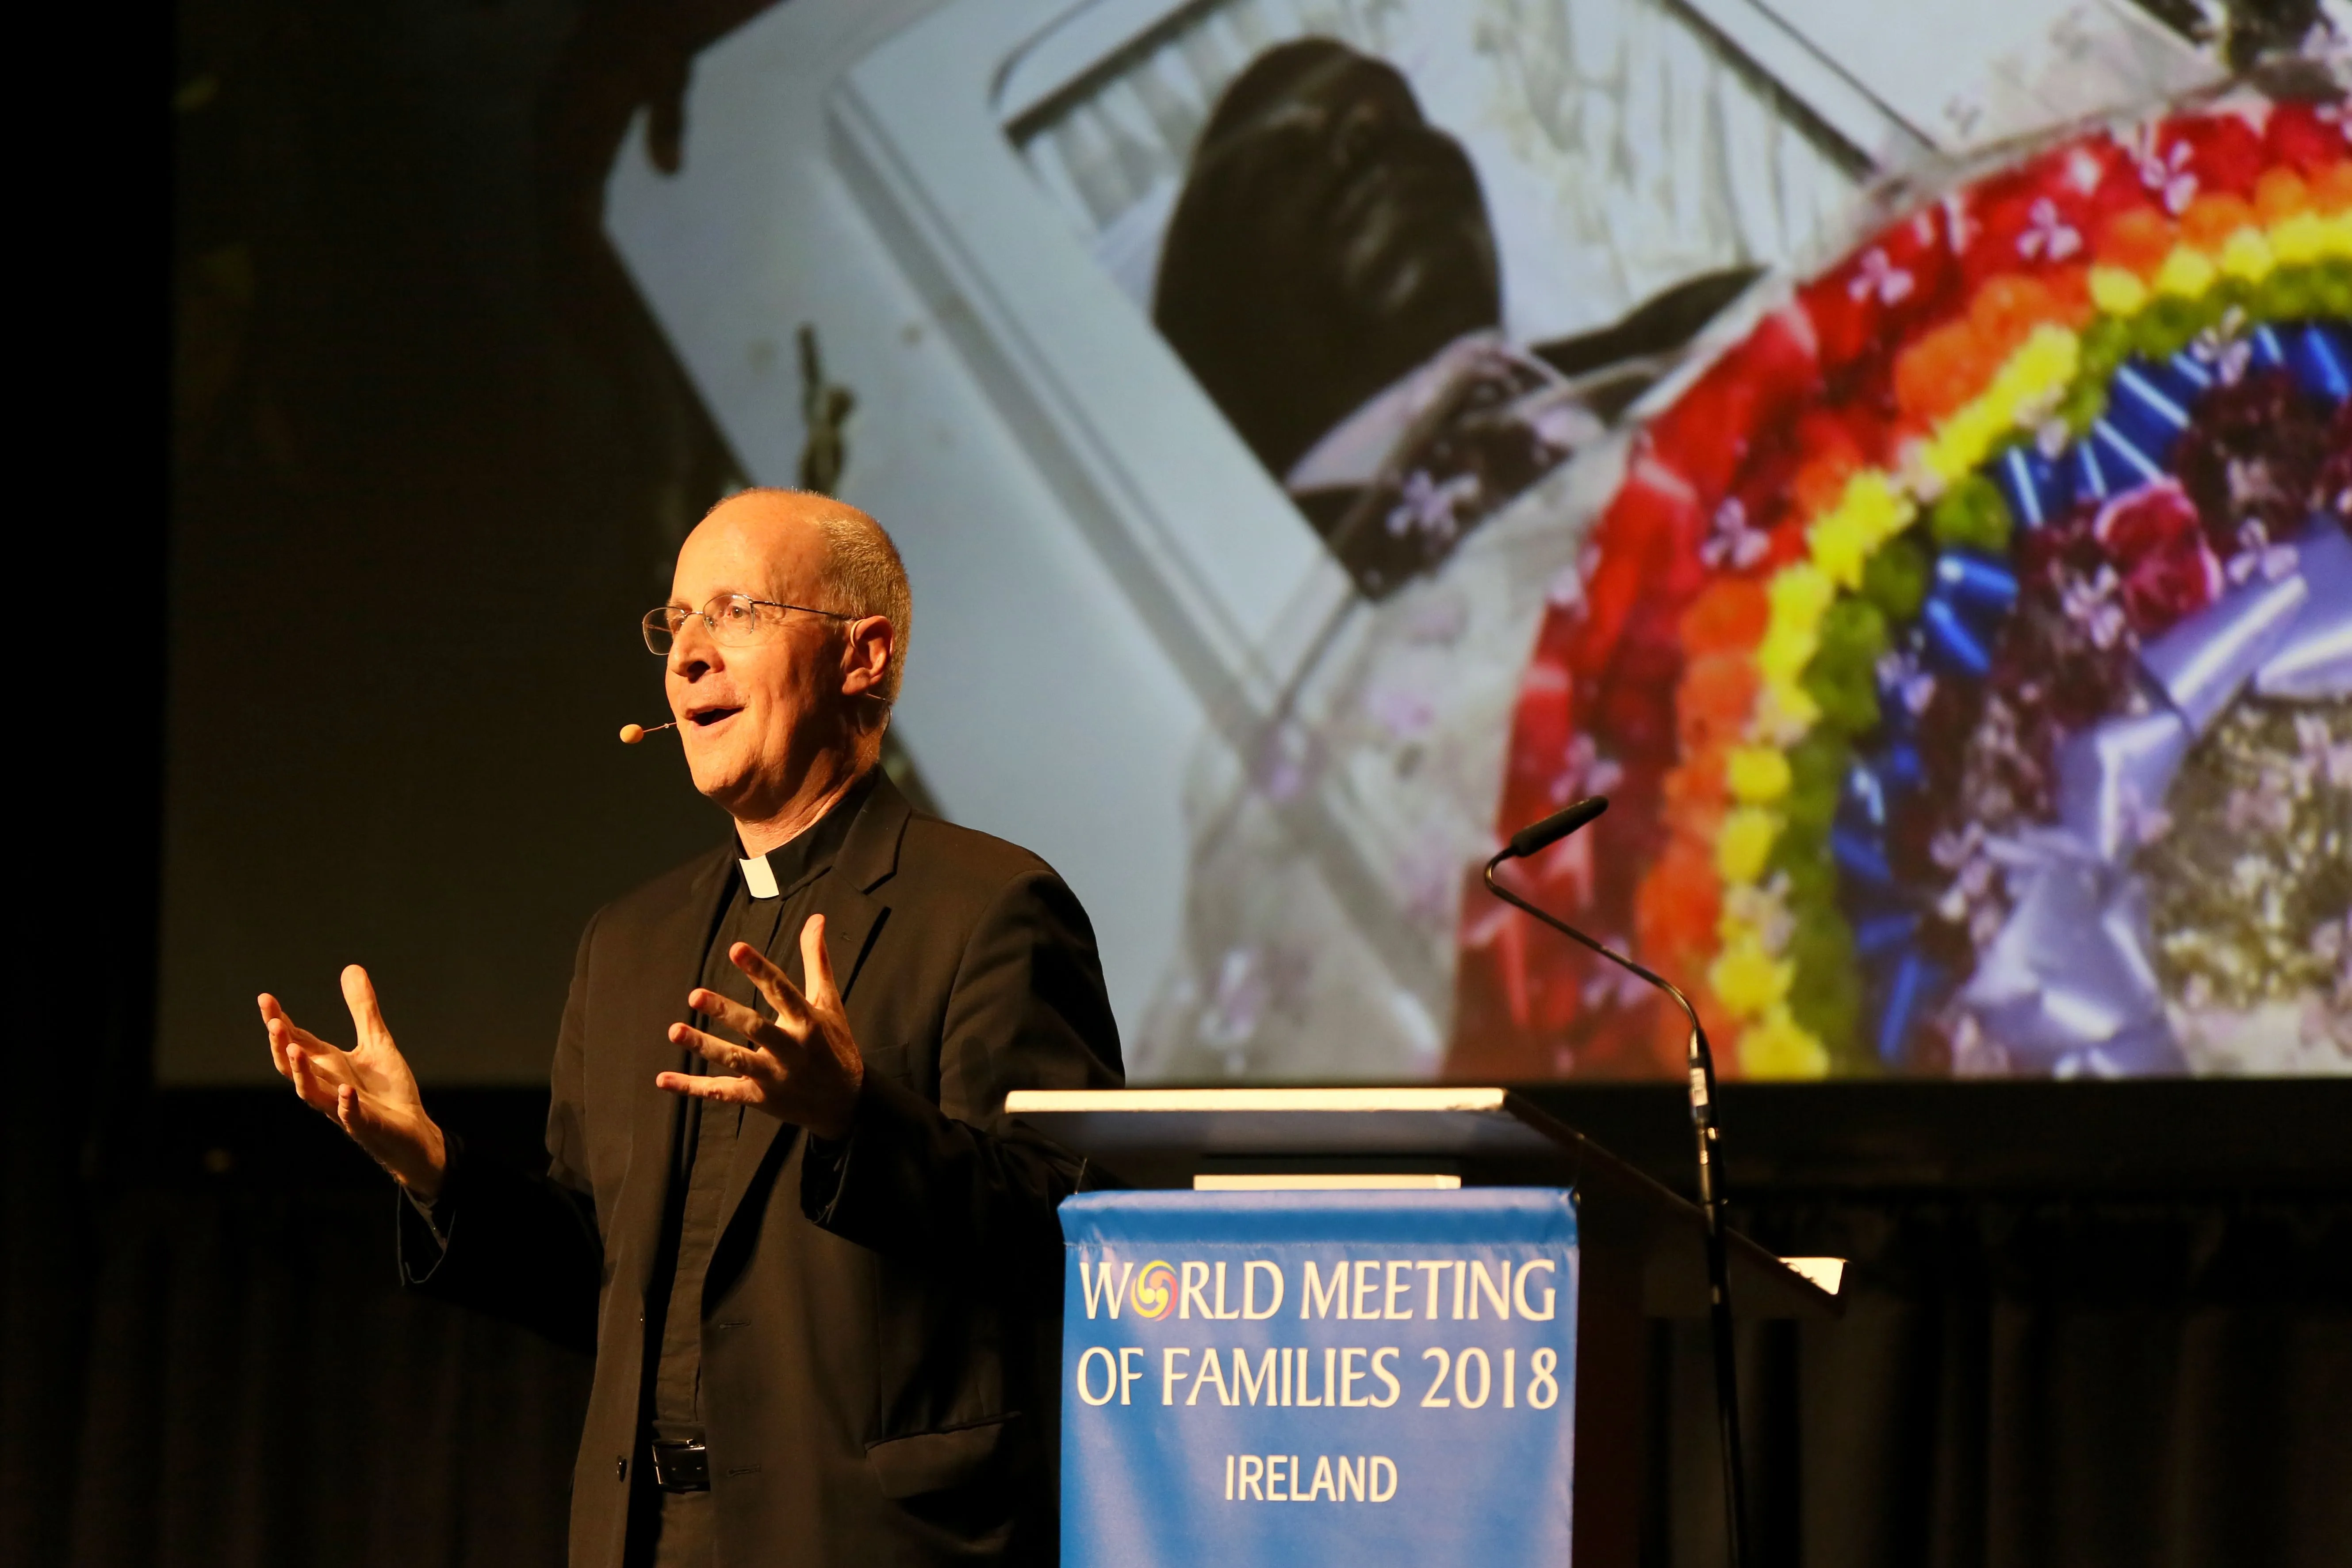 Father James Martin, S.J., speaks at the World Meeting of Families in Dublin on August 23, 2018.?w=200&h=150